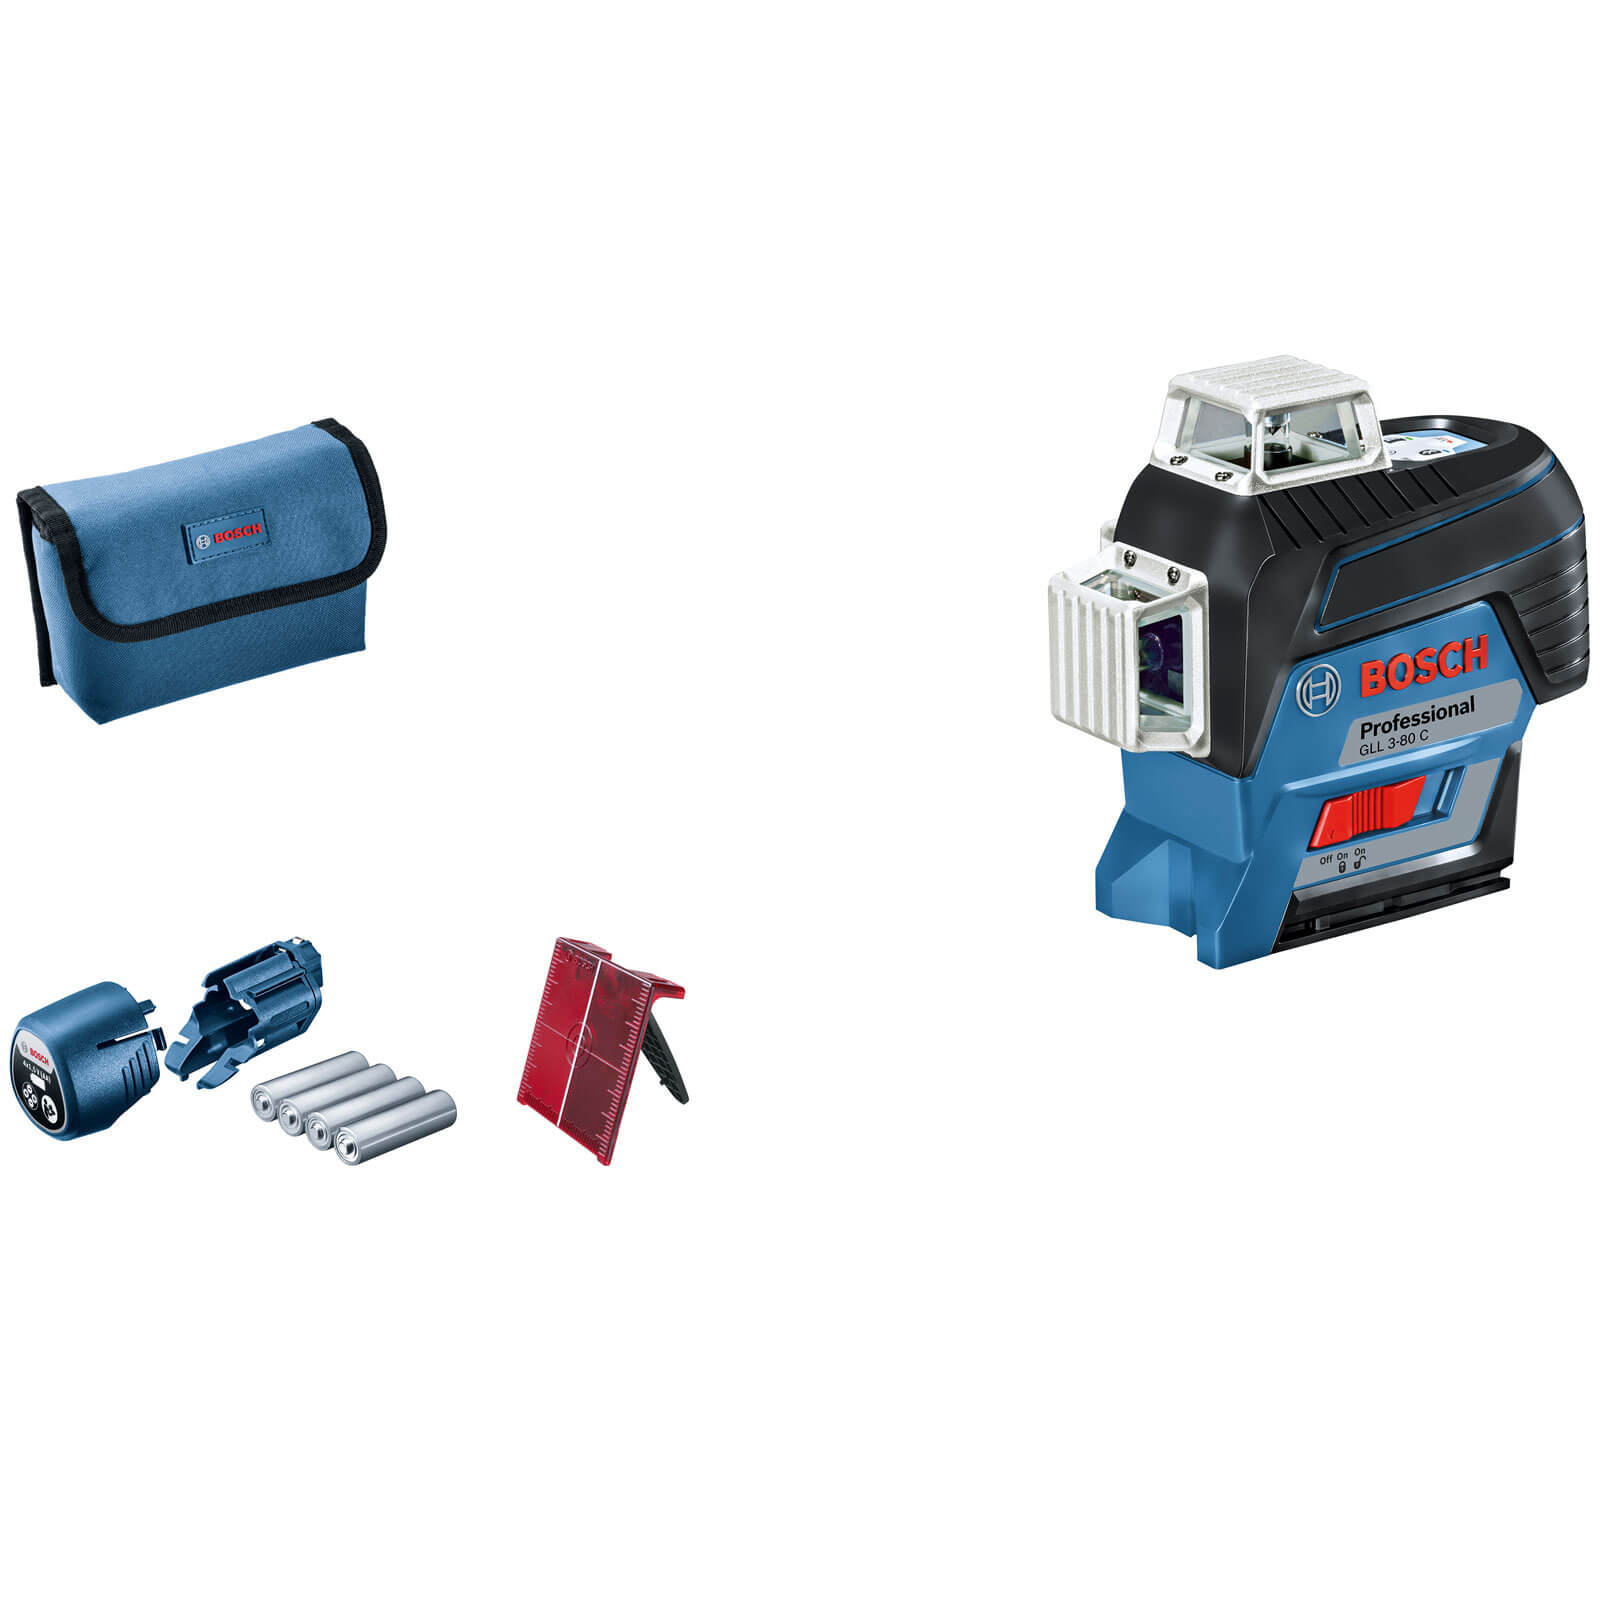 Image of Bosch GLL 3-80 C 12v Cordless Connected Line Laser Level No Batteries No Charger No Case